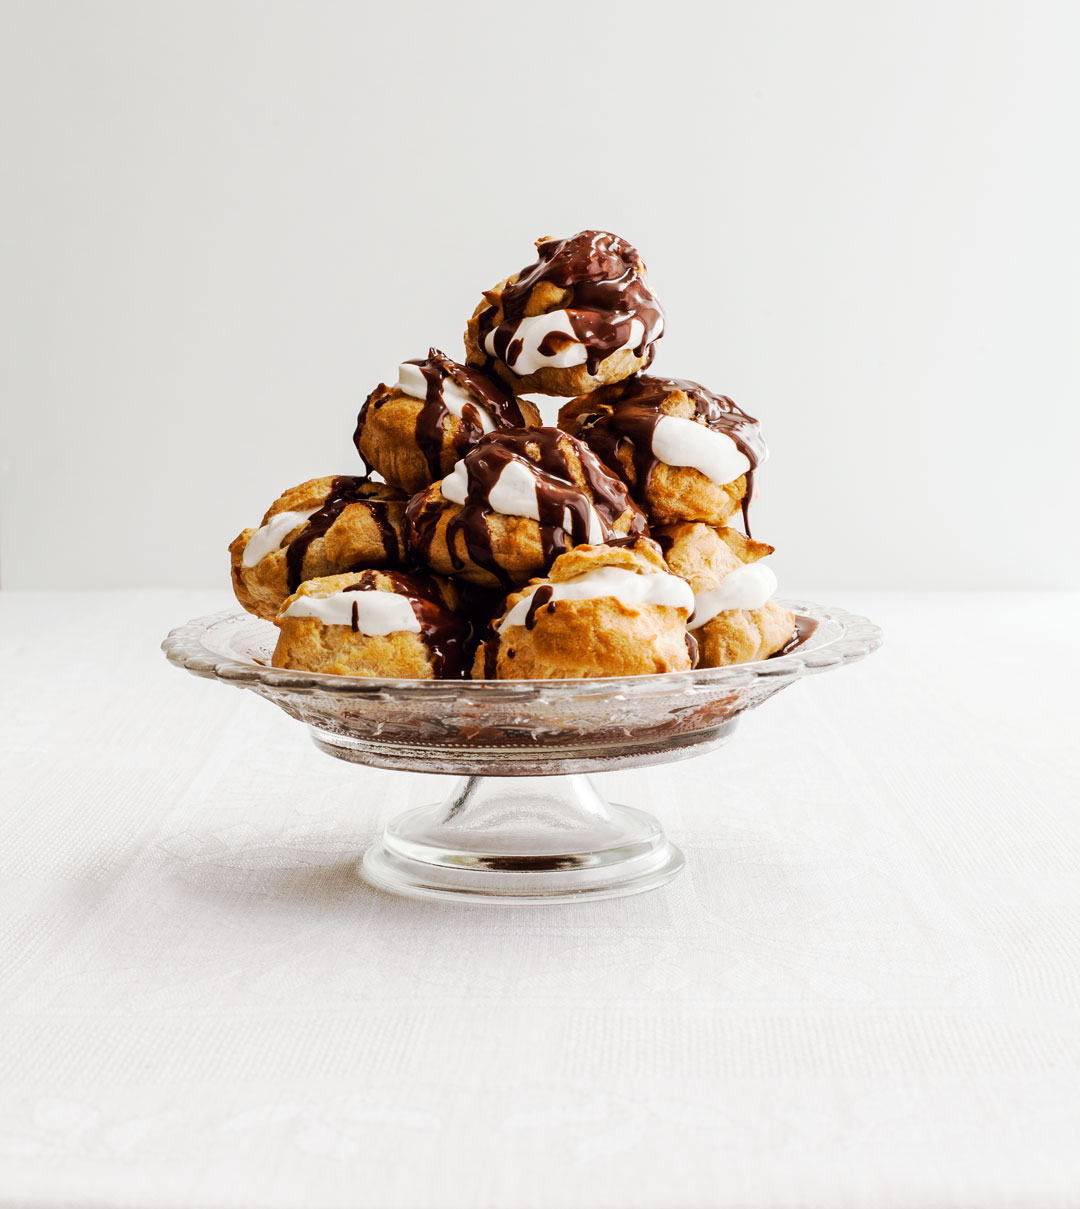 Chocolate profiteroles, as featured in Simple & Classic